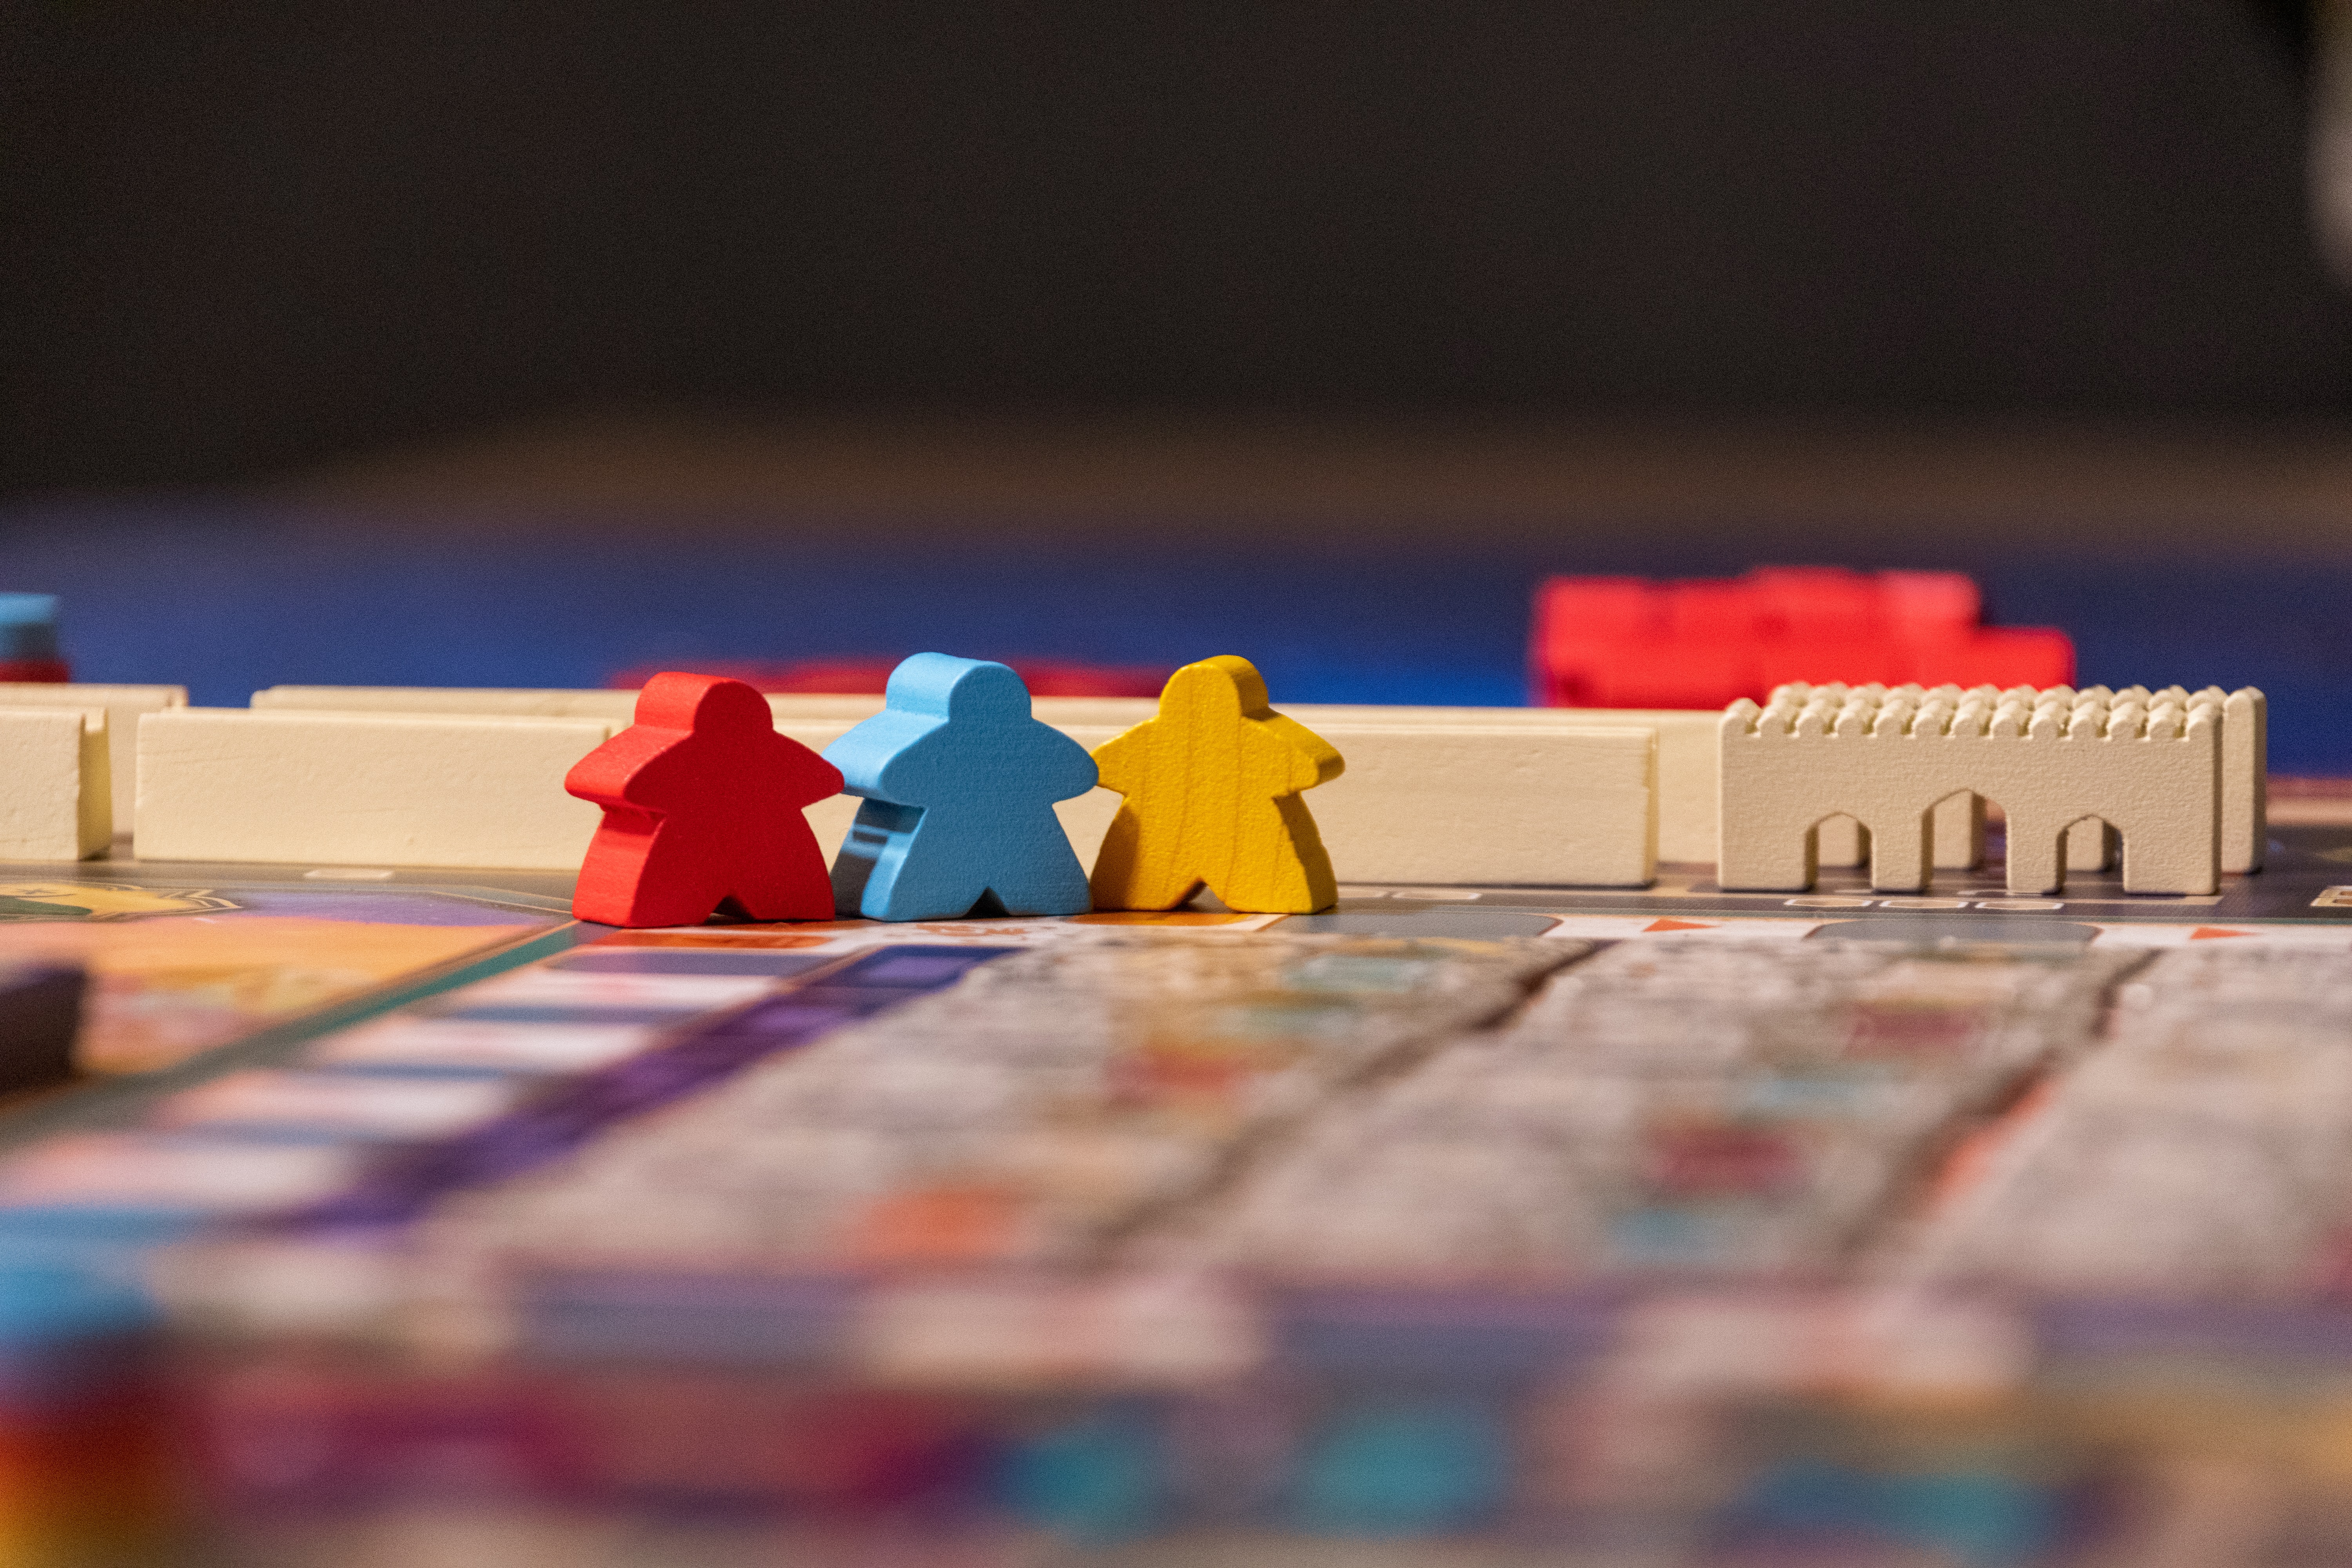 Hero image of Meeples on a playing board. -Christopher Paul